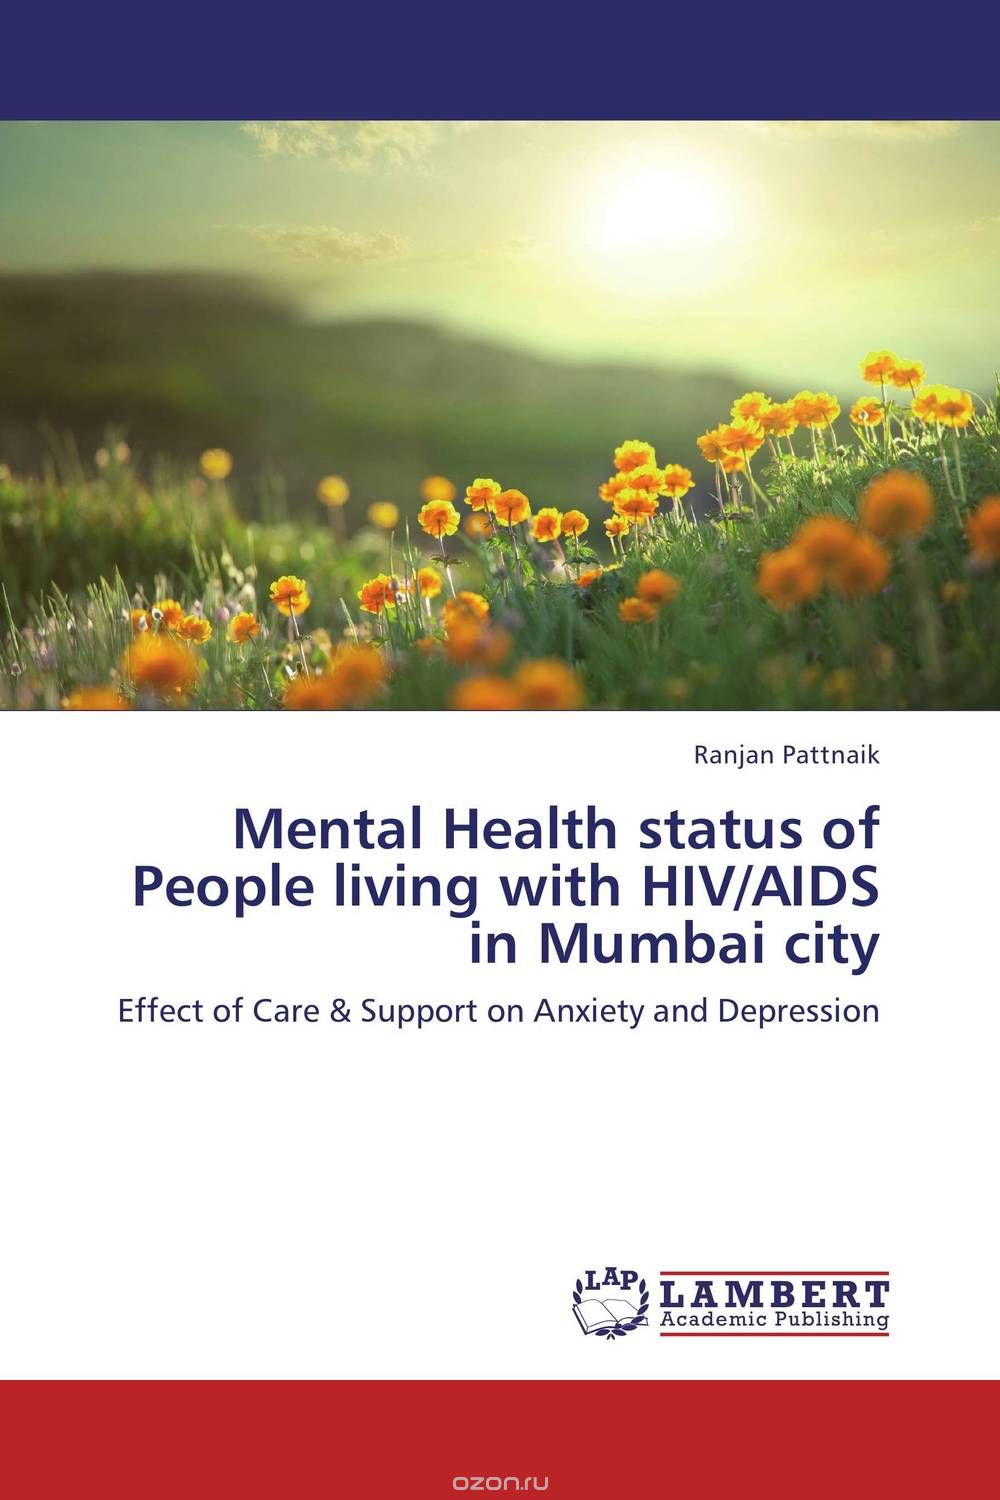 Mental Health status of People living with HIV/AIDS in Mumbai city